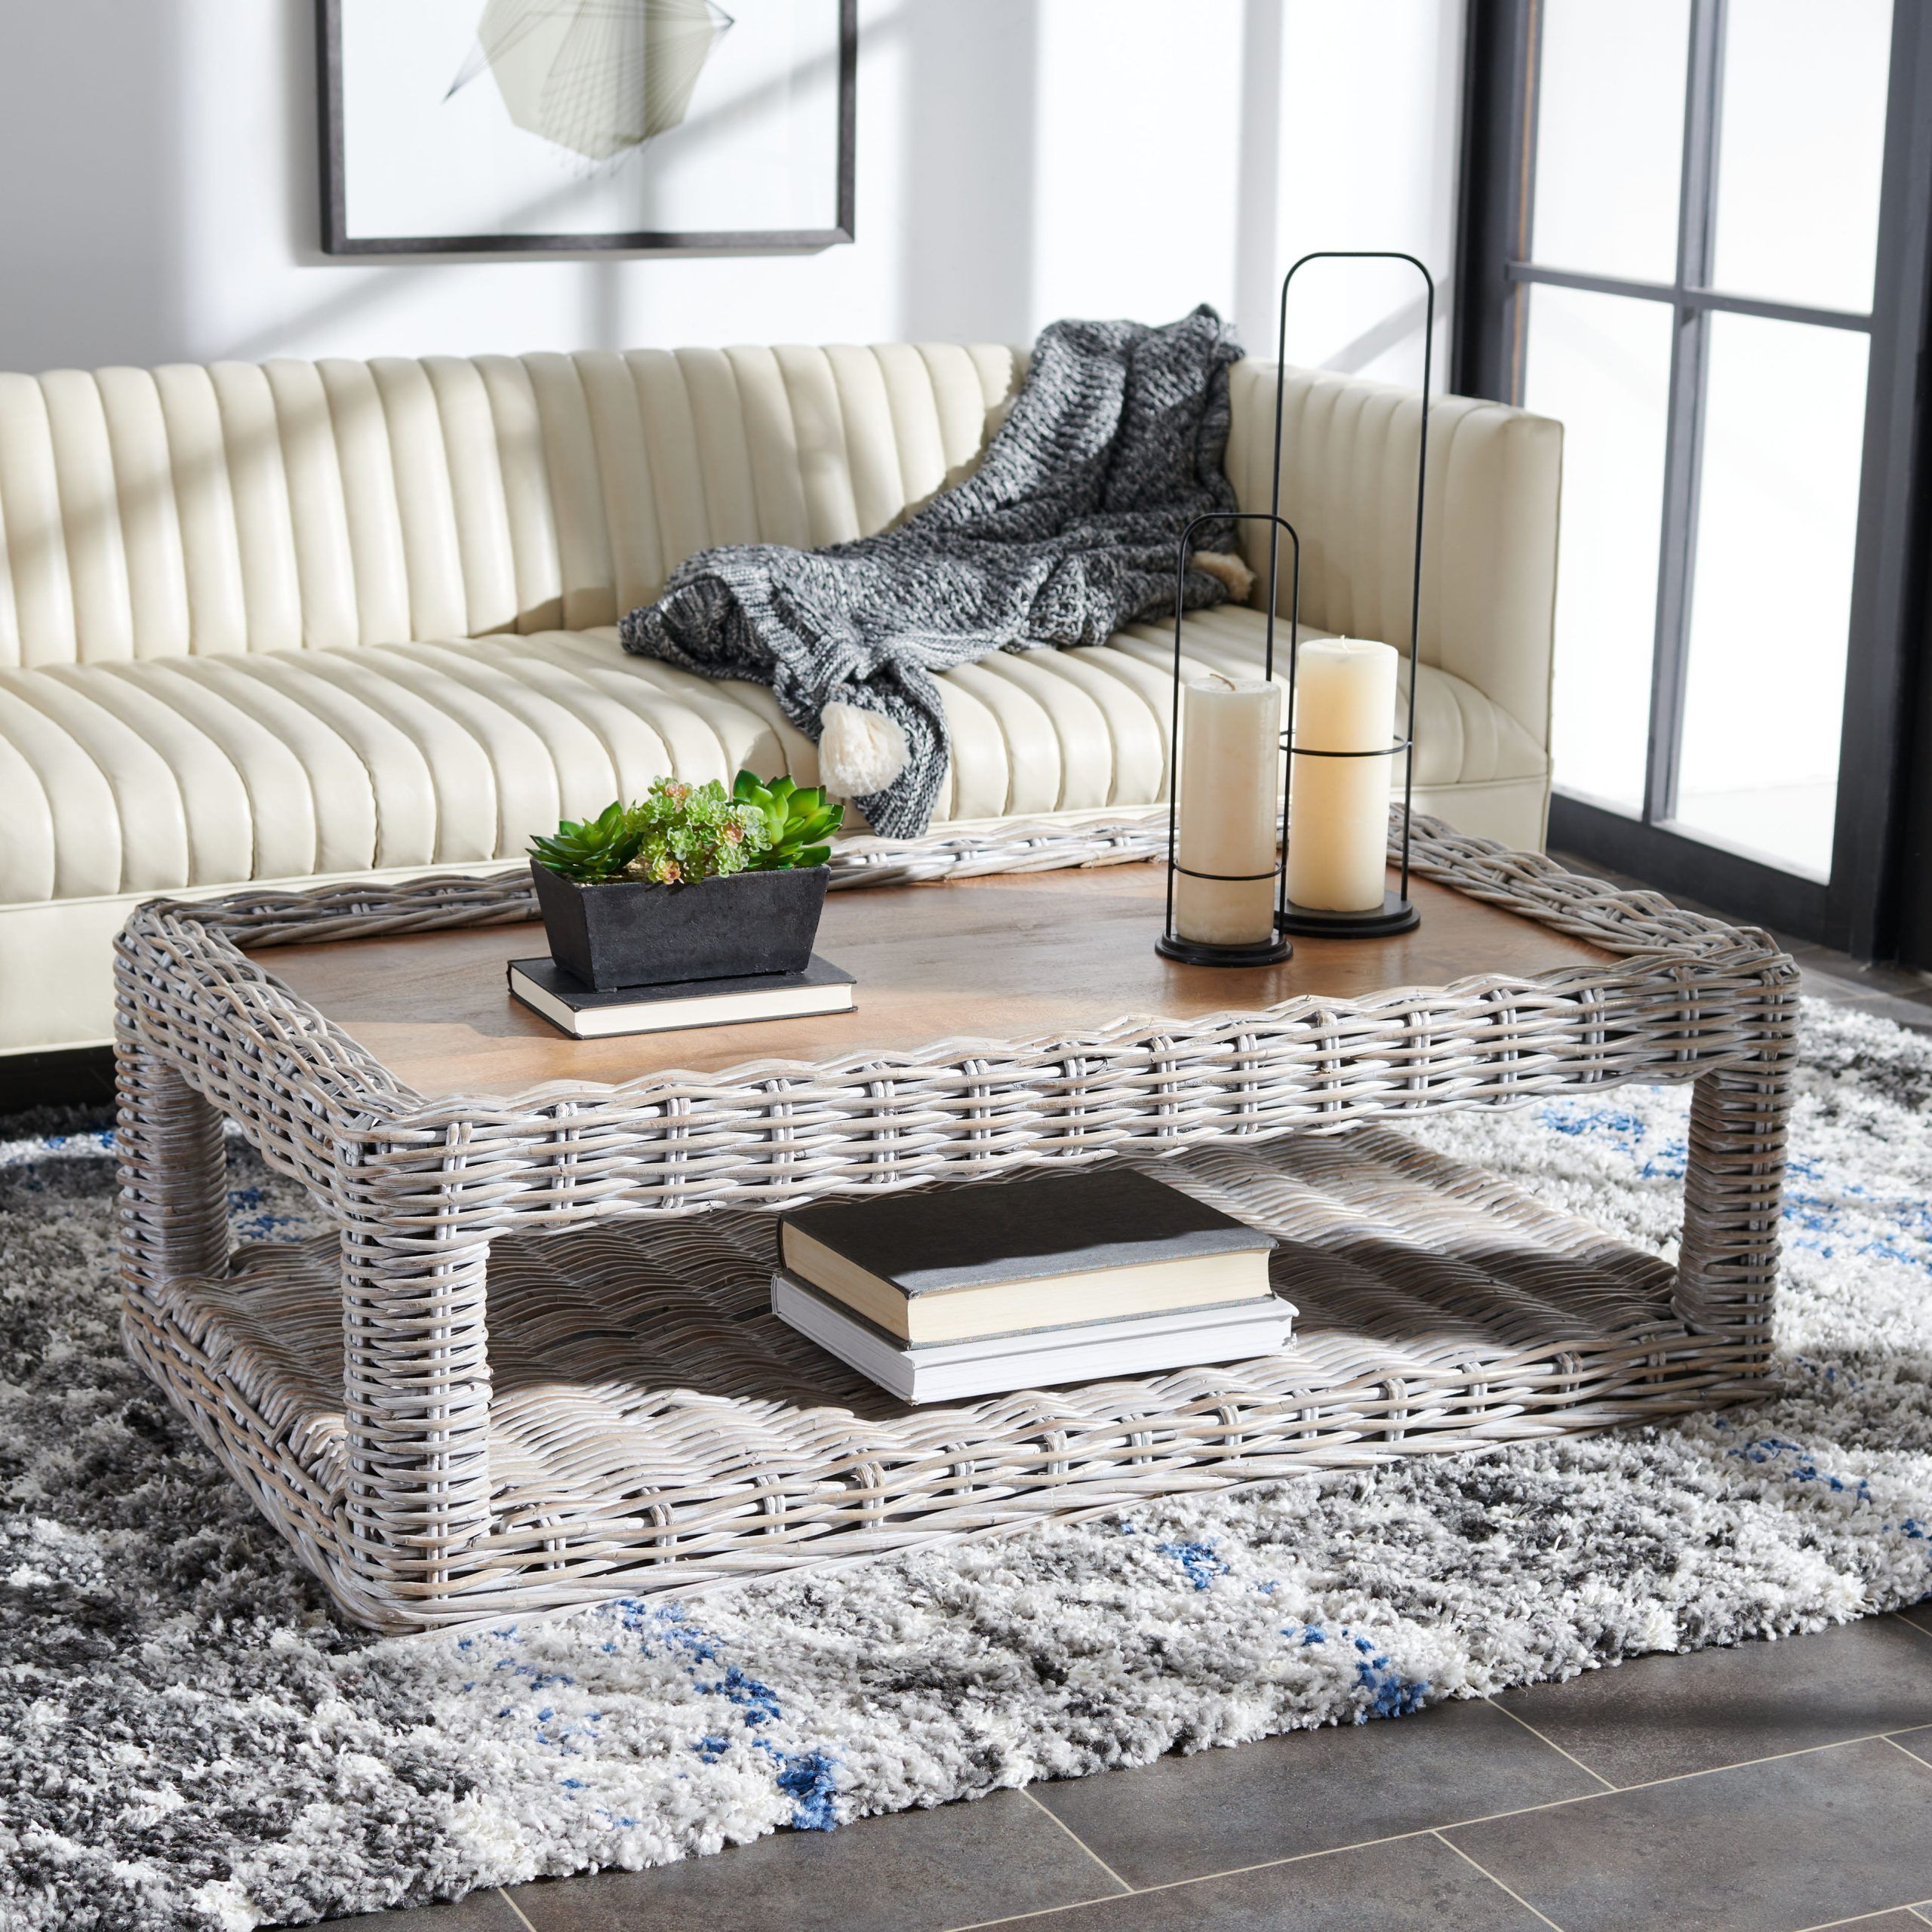 Woven Paths Coffee Tables Inside Best And Newest Safavieh Sacramento Rattan Coffee Table, Grey White Wash/ Natural (View 11 of 15)